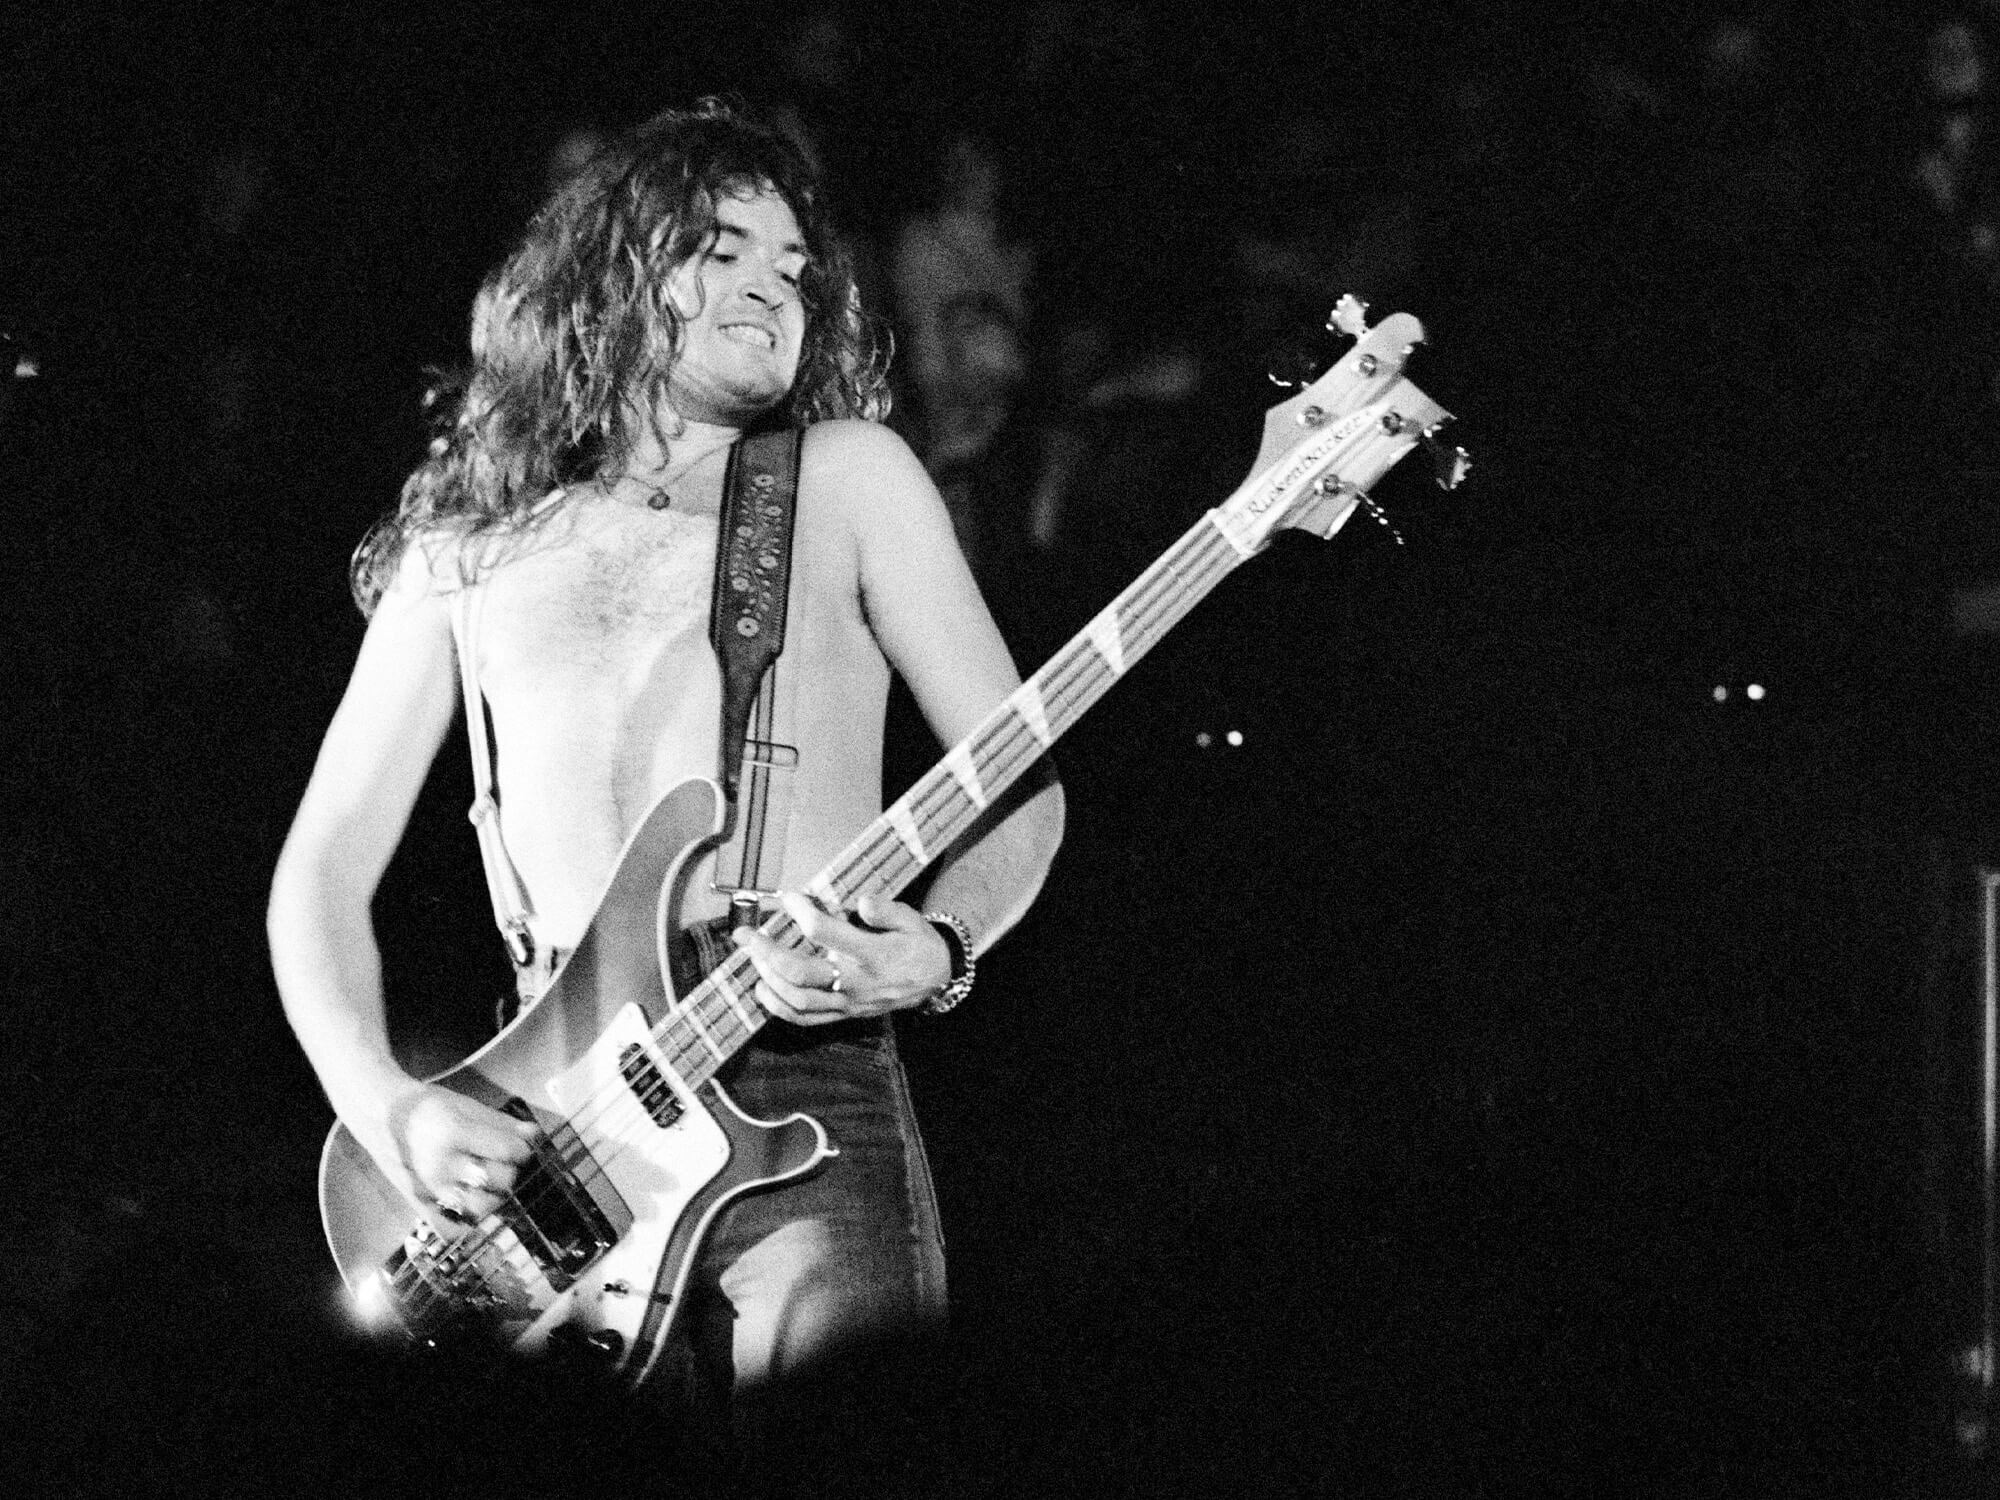 Black and white photos of Glenn Hughes performing in the mid 70s